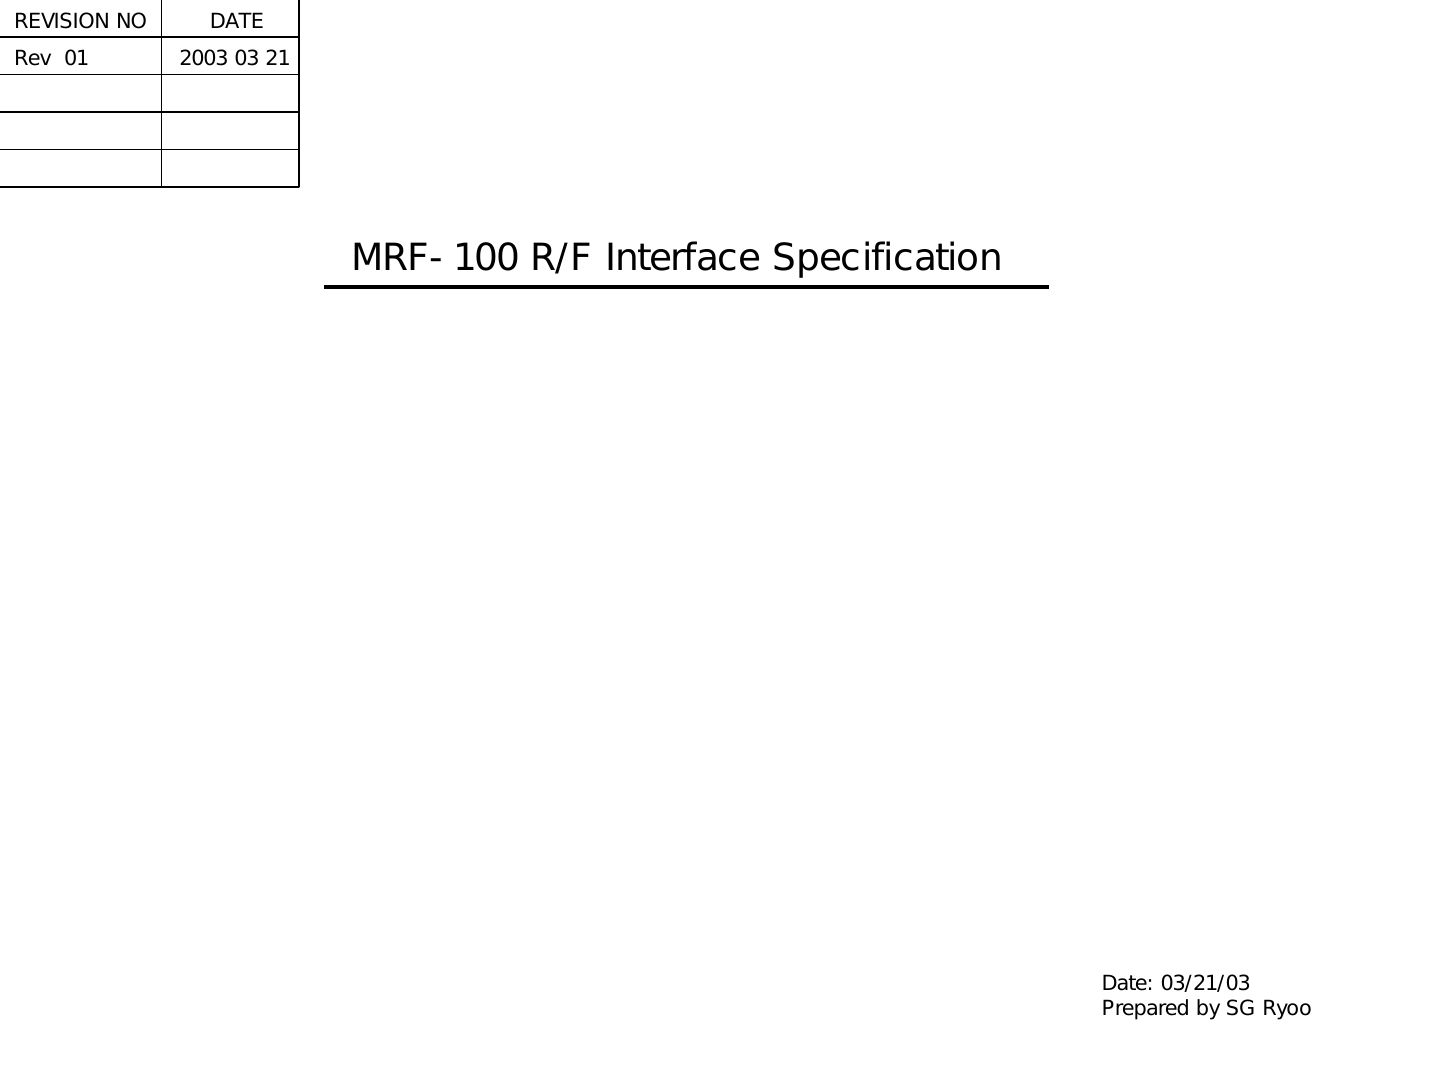 MRF-100 R/F Interface SpecificationDate: 03/21/03Prepared by SG RyooREVISION NO     DATERev  01             2003 03 21